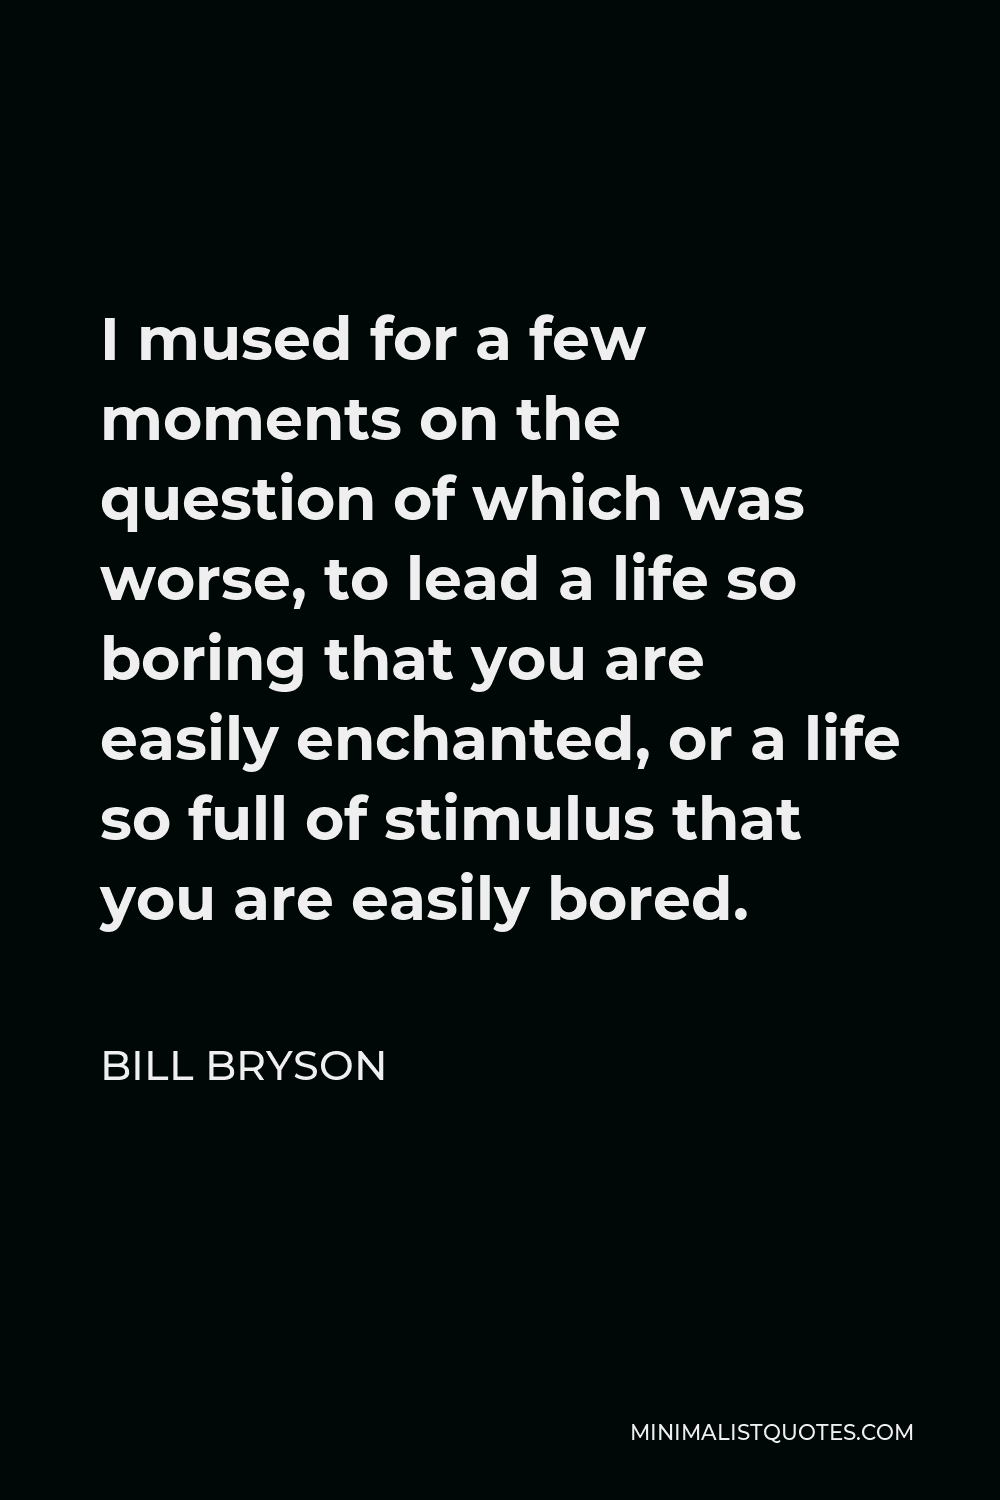 Bill Bryson Quote - I mused for a few moments on the question of which was worse, to lead a life so boring that you are easily enchanted, or a life so full of stimulus that you are easily bored.